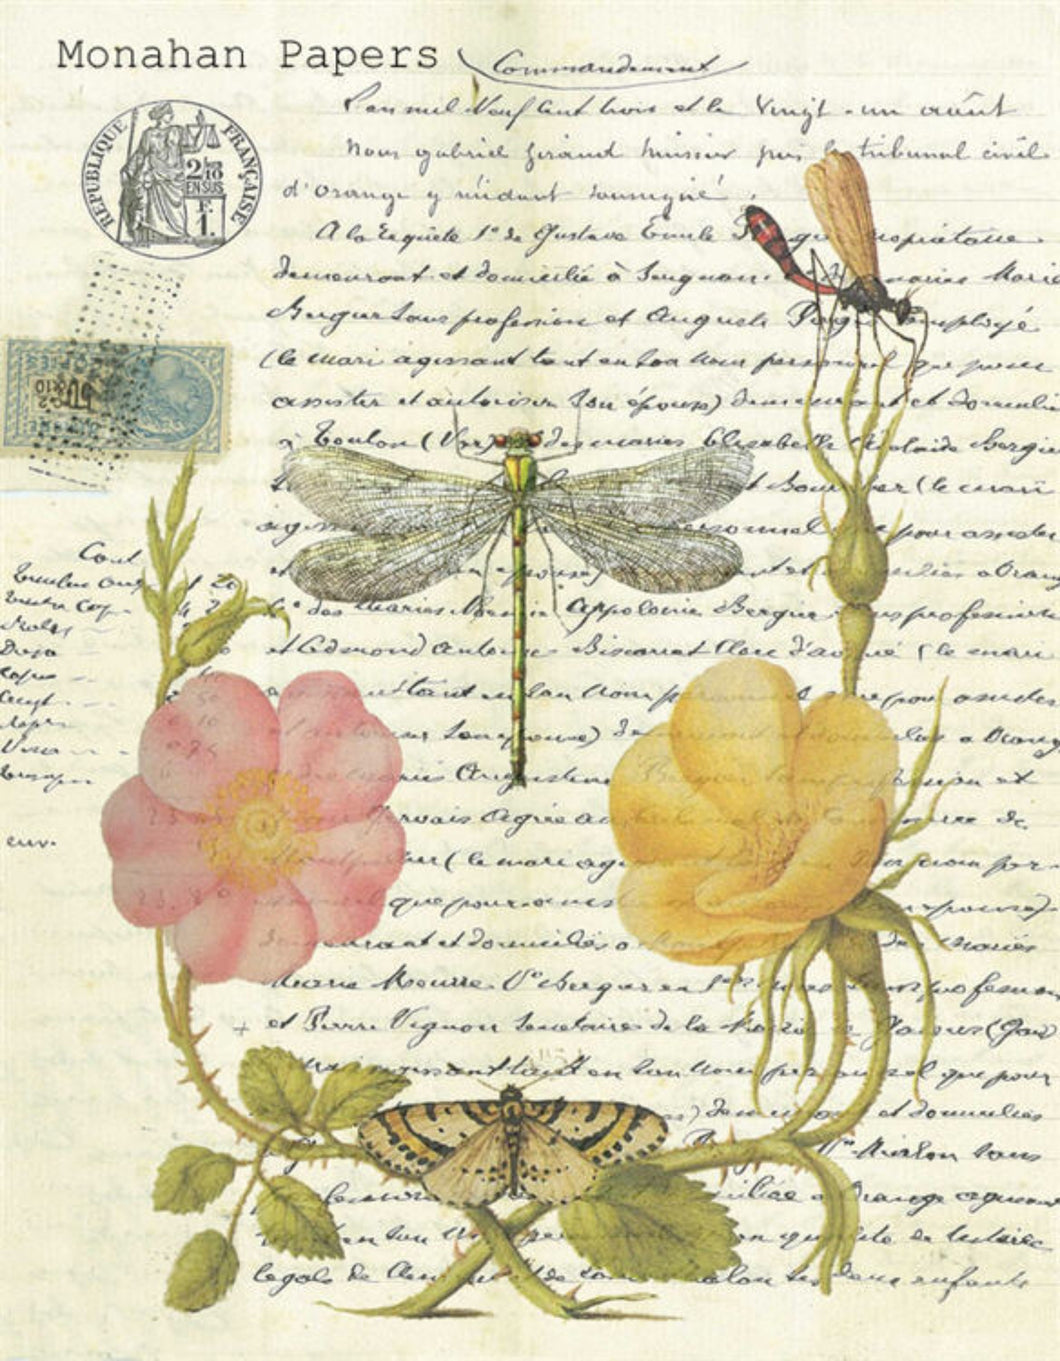 Dragonfly by Monahan Papers, X331